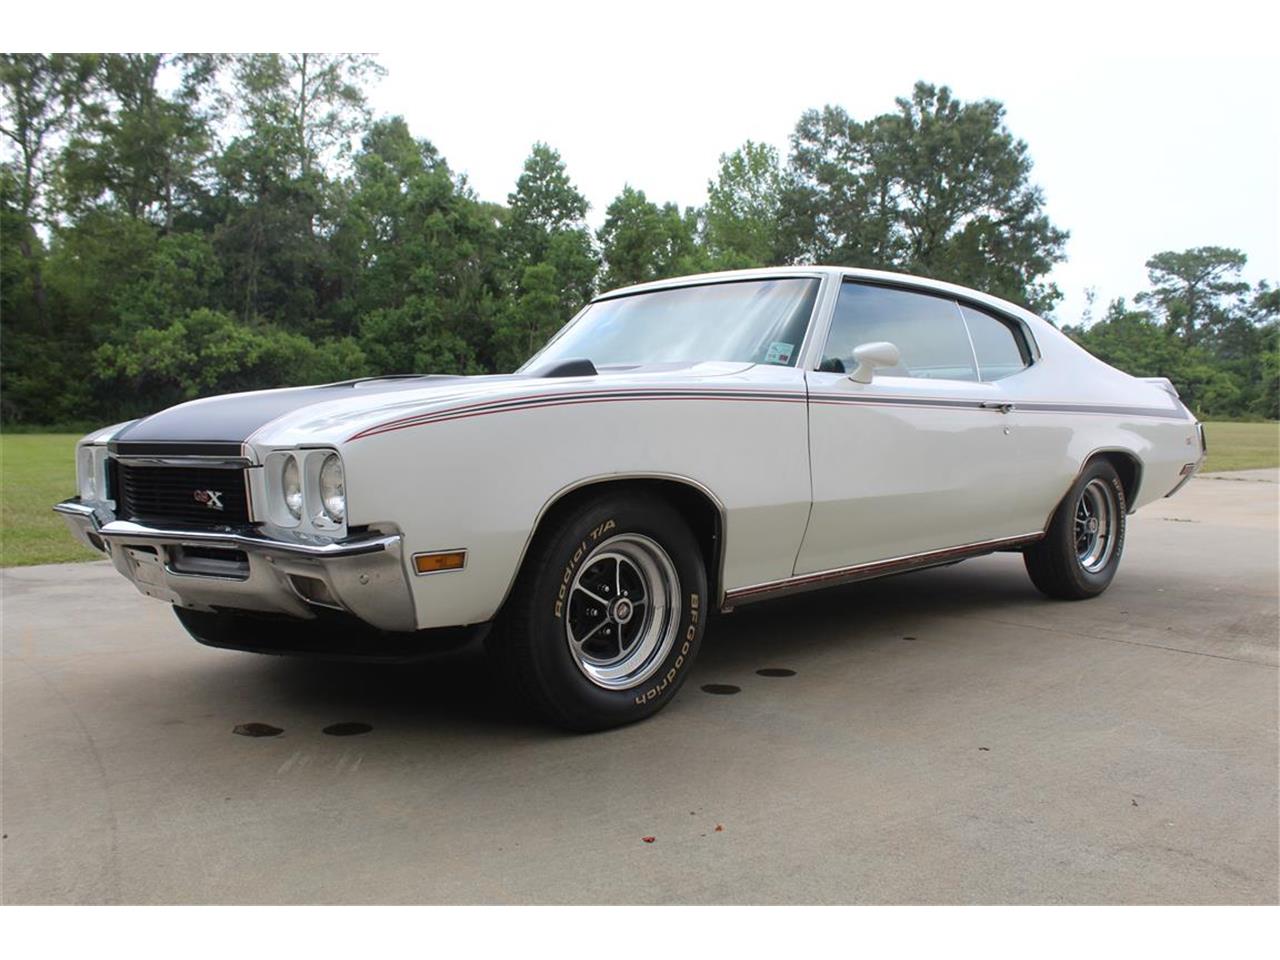 for sale at auction 1972 buick gran sport in leeds, alabama for sale in leeds, al